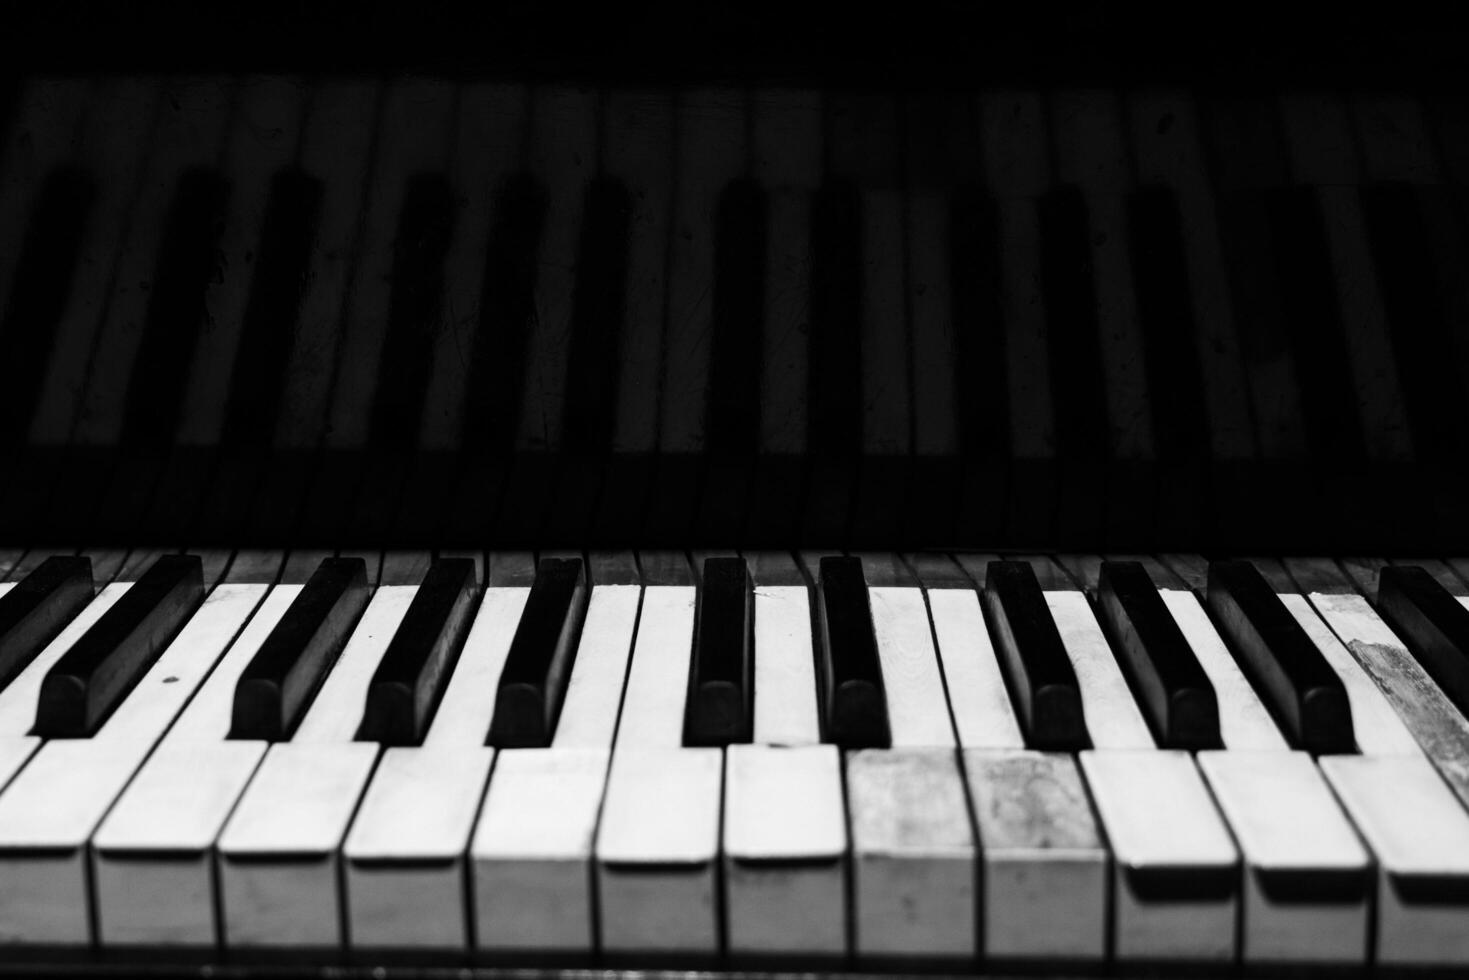 The keyboard of a classic old grand piano in close-up photo